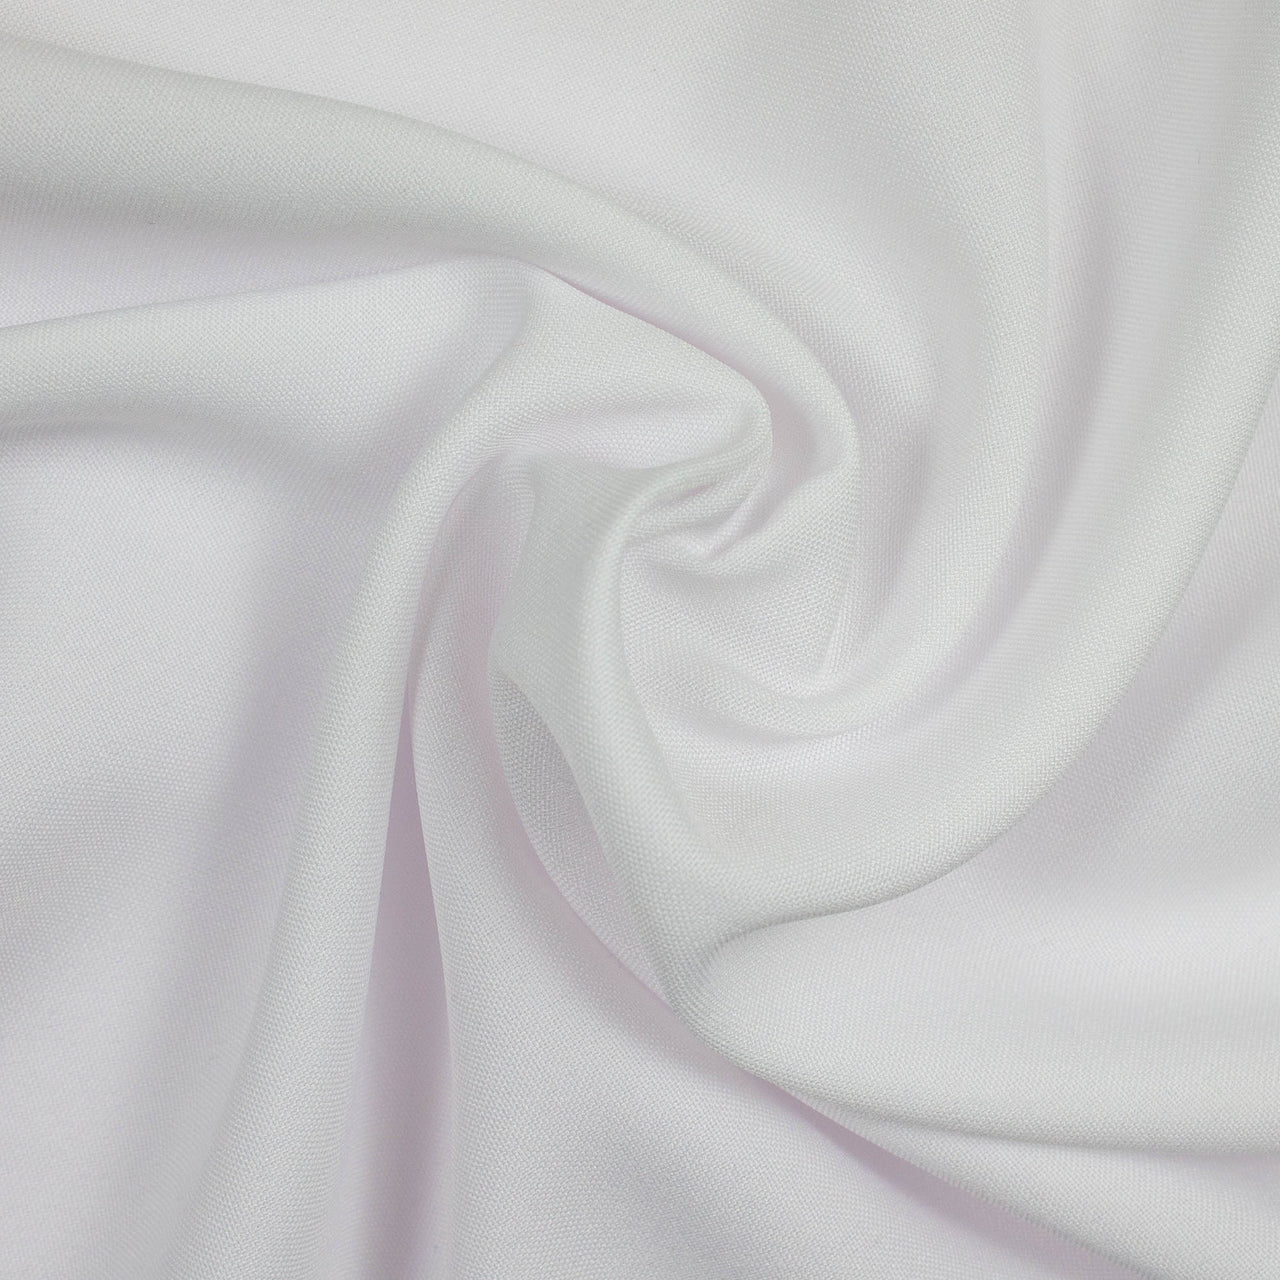 Sublimation Fabric - Recycled Bi-Stretch Panama - Recycled Polyester based Digital Print Fabric